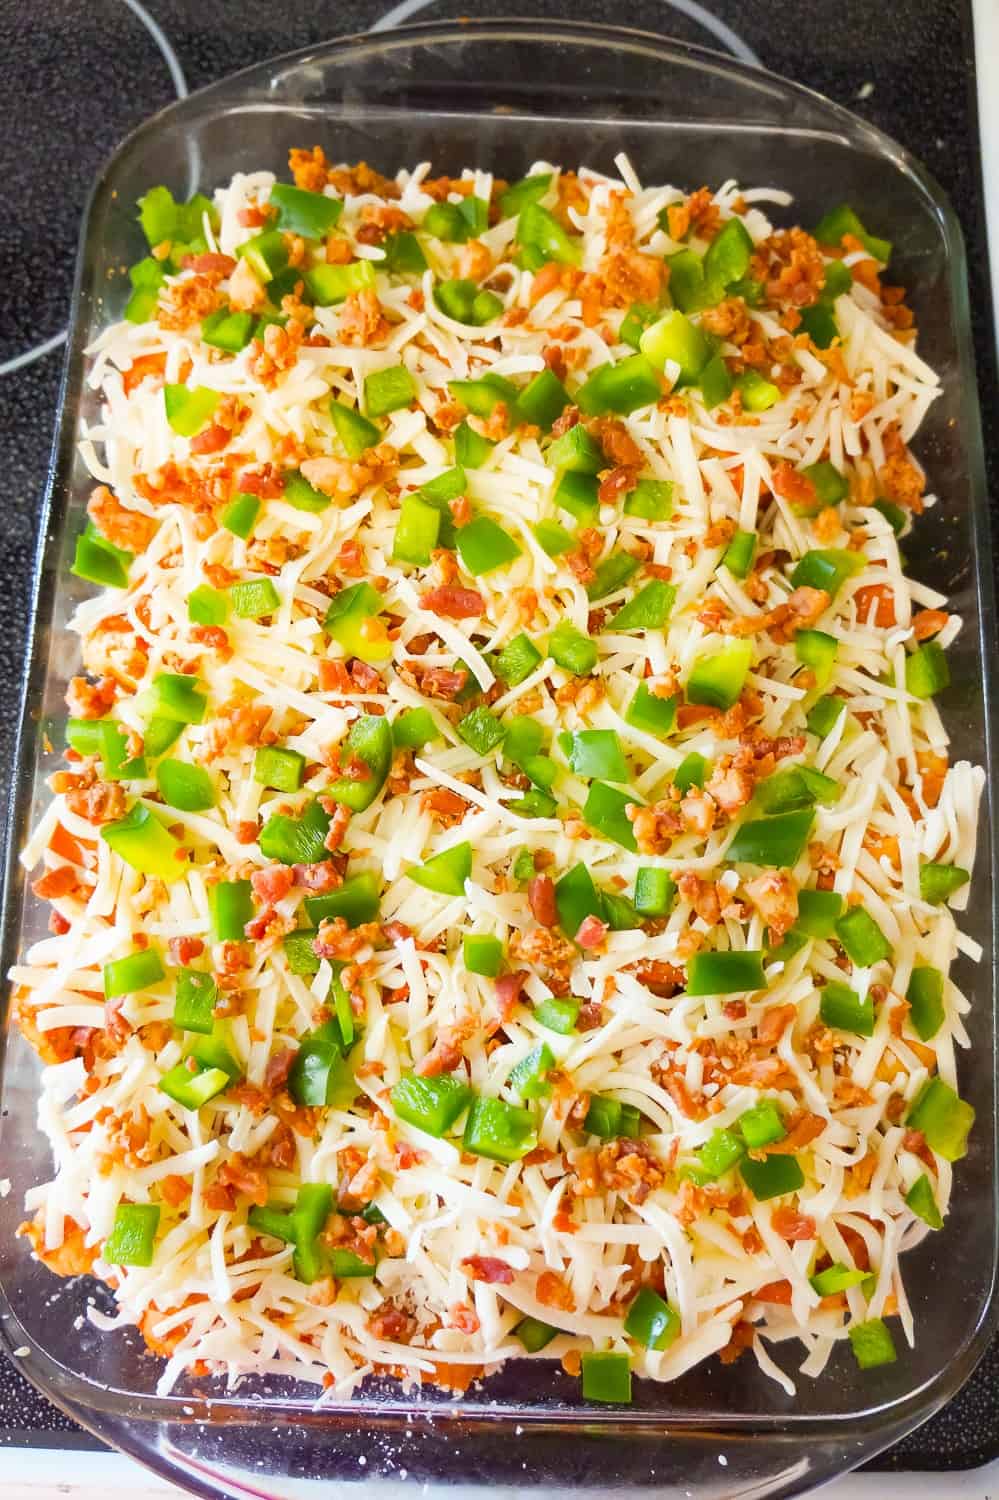 pizza bagel casserole topped with shredded mozzarella, diced green peppers and bacon crumble before baking